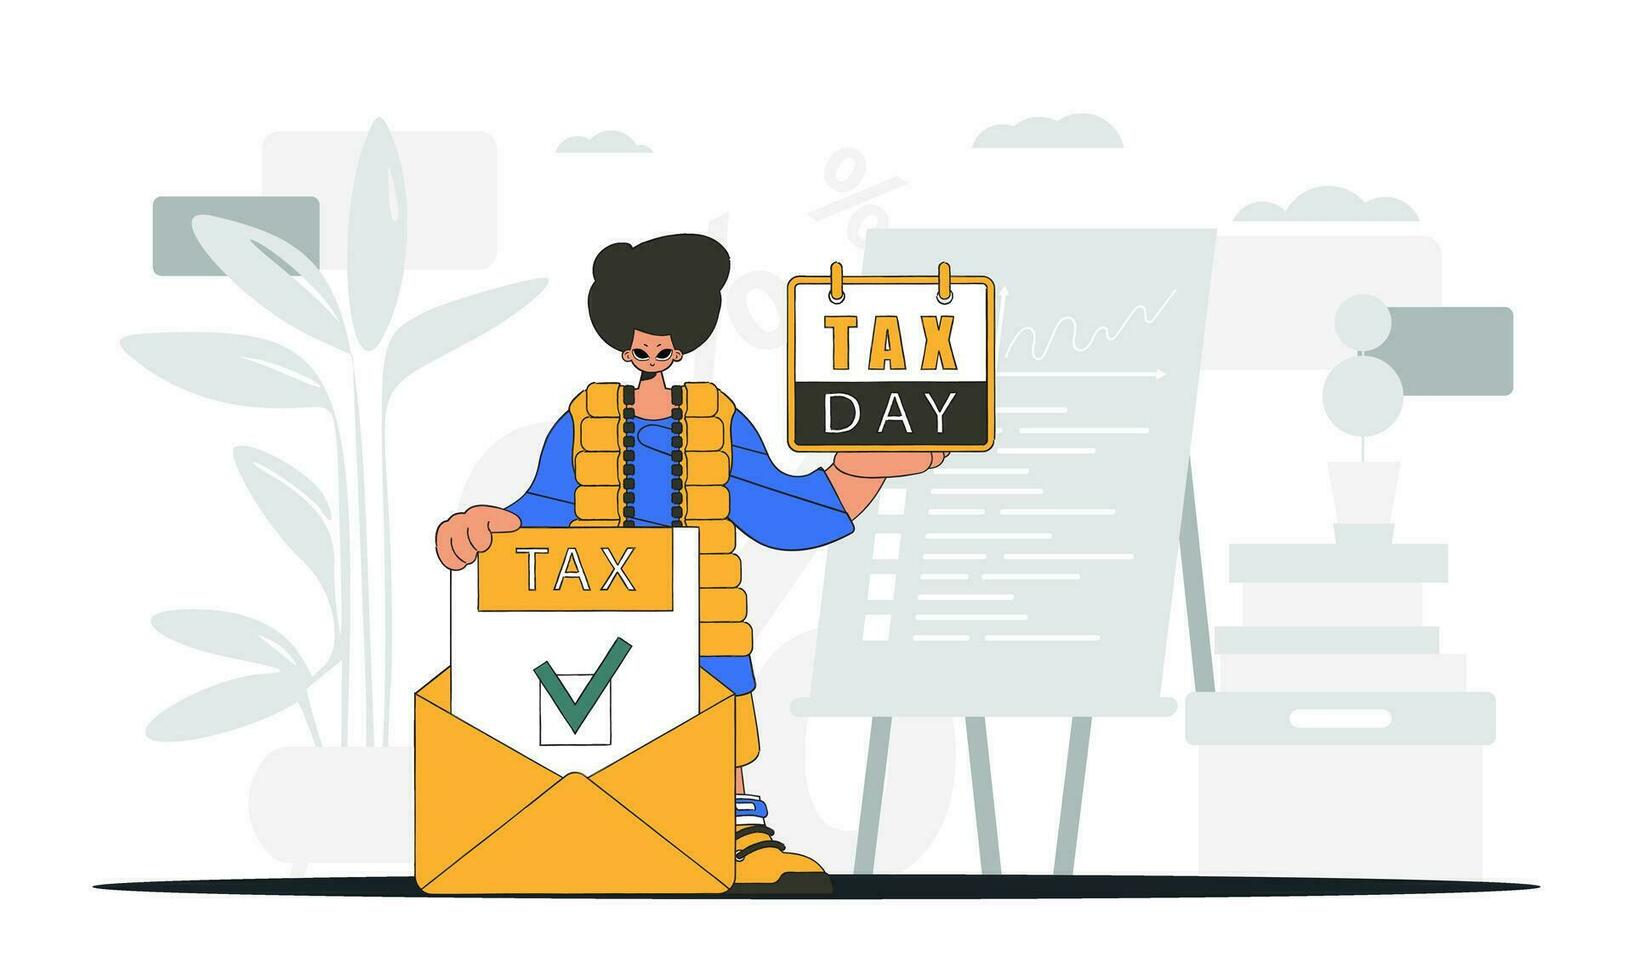 Trendy man holds a calendal in his hand. TAX day. An illustration demonstrating the importance of paying taxes for economic development. vector